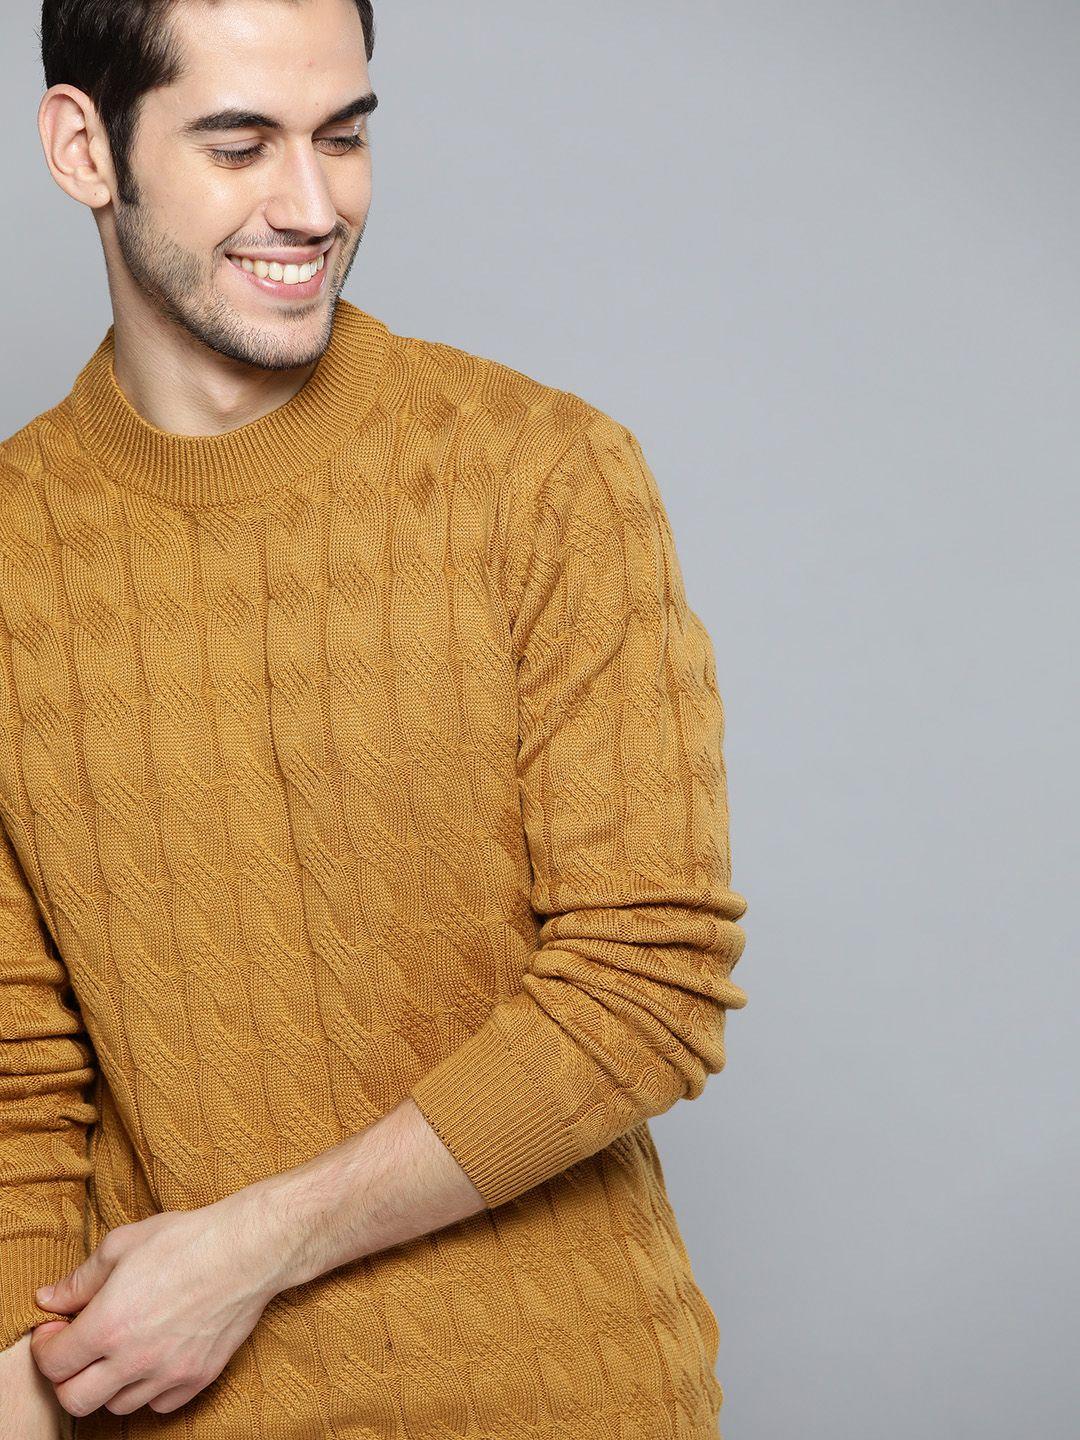 mast-&-harbour-men-mustard-yellow-cable-knit-pullover